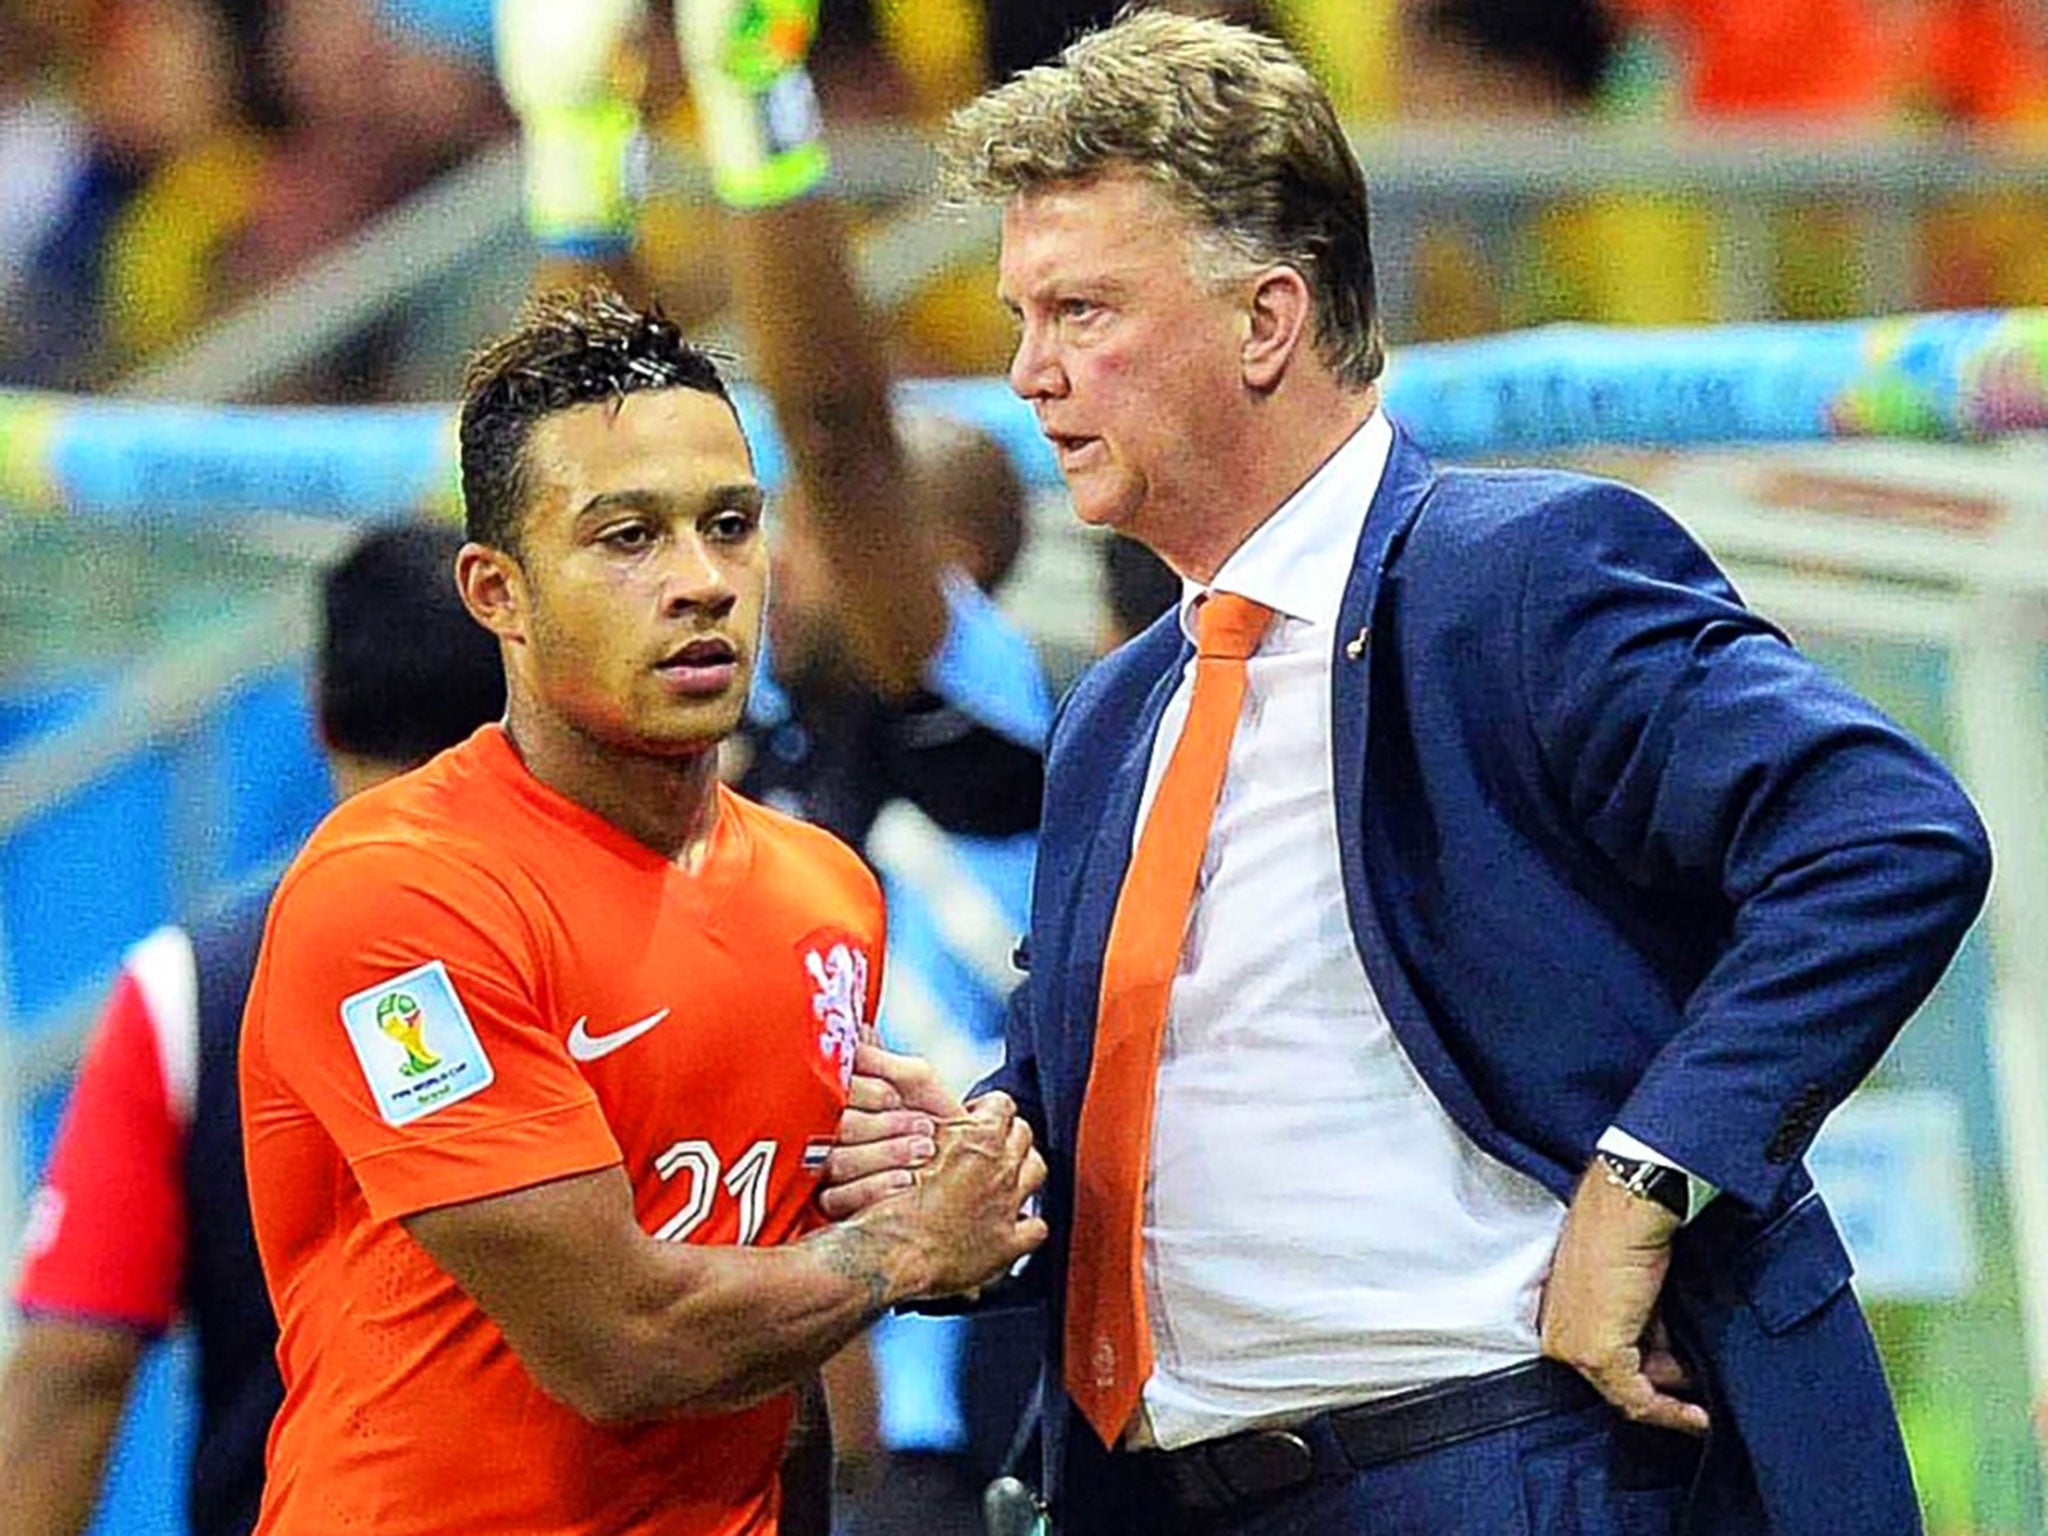 Memphis Depay impressed playing for Louis van Gaal’s Netherlands at last year’s World Cup